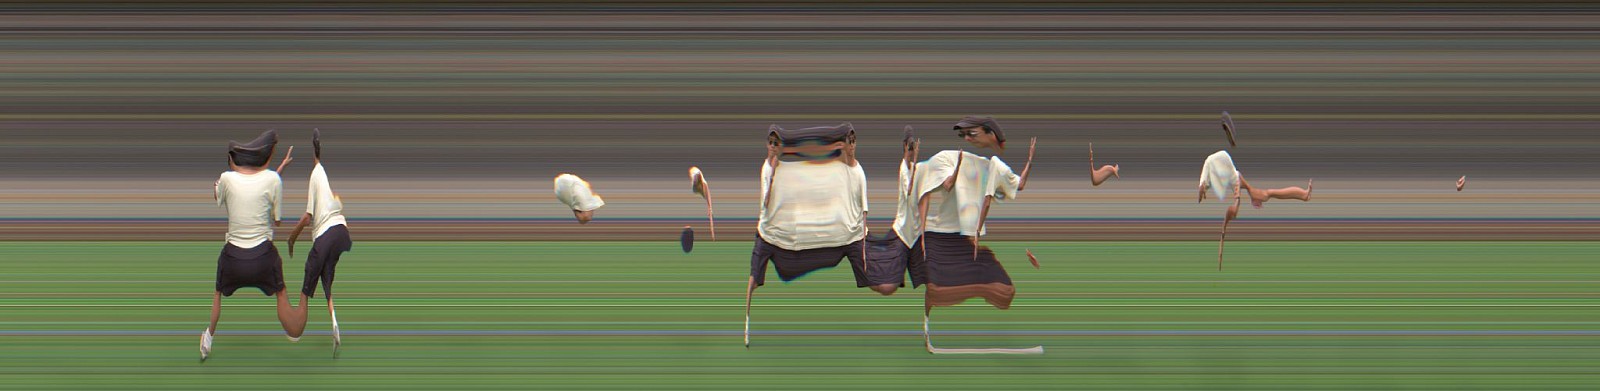 Jay Mark Johnson, TAICHI MOTION STUDY 121, 2005 Los Angeles CA
archival pigment on paper, mounted on aluminum, 40 x 163 in. (101.6 x 414 cm)